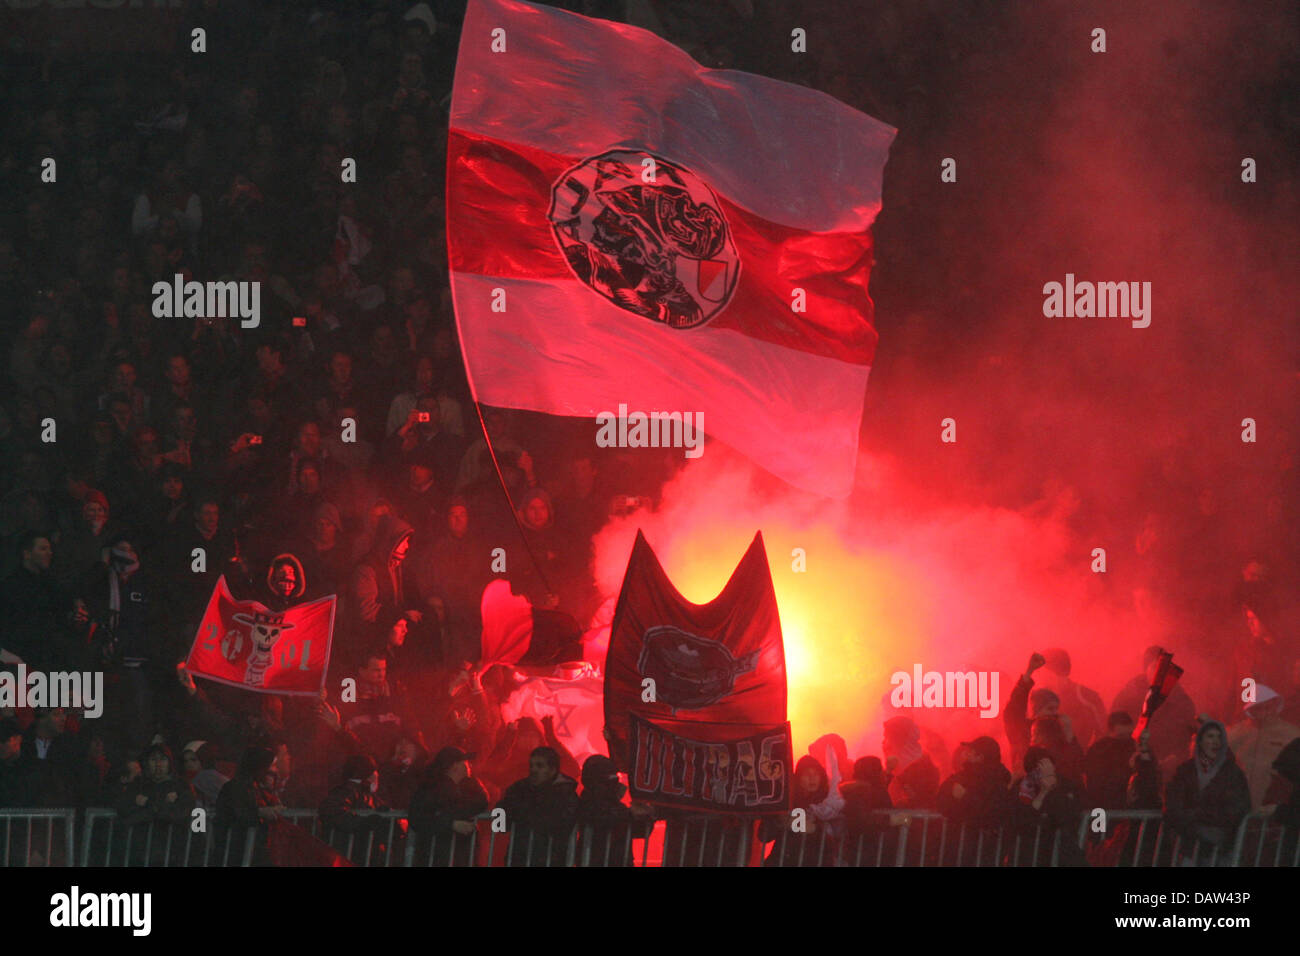 The picture shows a group of supporters of Dutch club Ajax Amsterdam prior to the first leg of the UEFA Cup first knockout round tie against SV Werder Bremen at the Weser stadium in Bremen, Germany, Wednesday, 14 February 2007. Three second half goals from Bremen gave the German side a 3-0 win over 10-man Ajax. Photo: Carmen Jaspersen Stock Photo